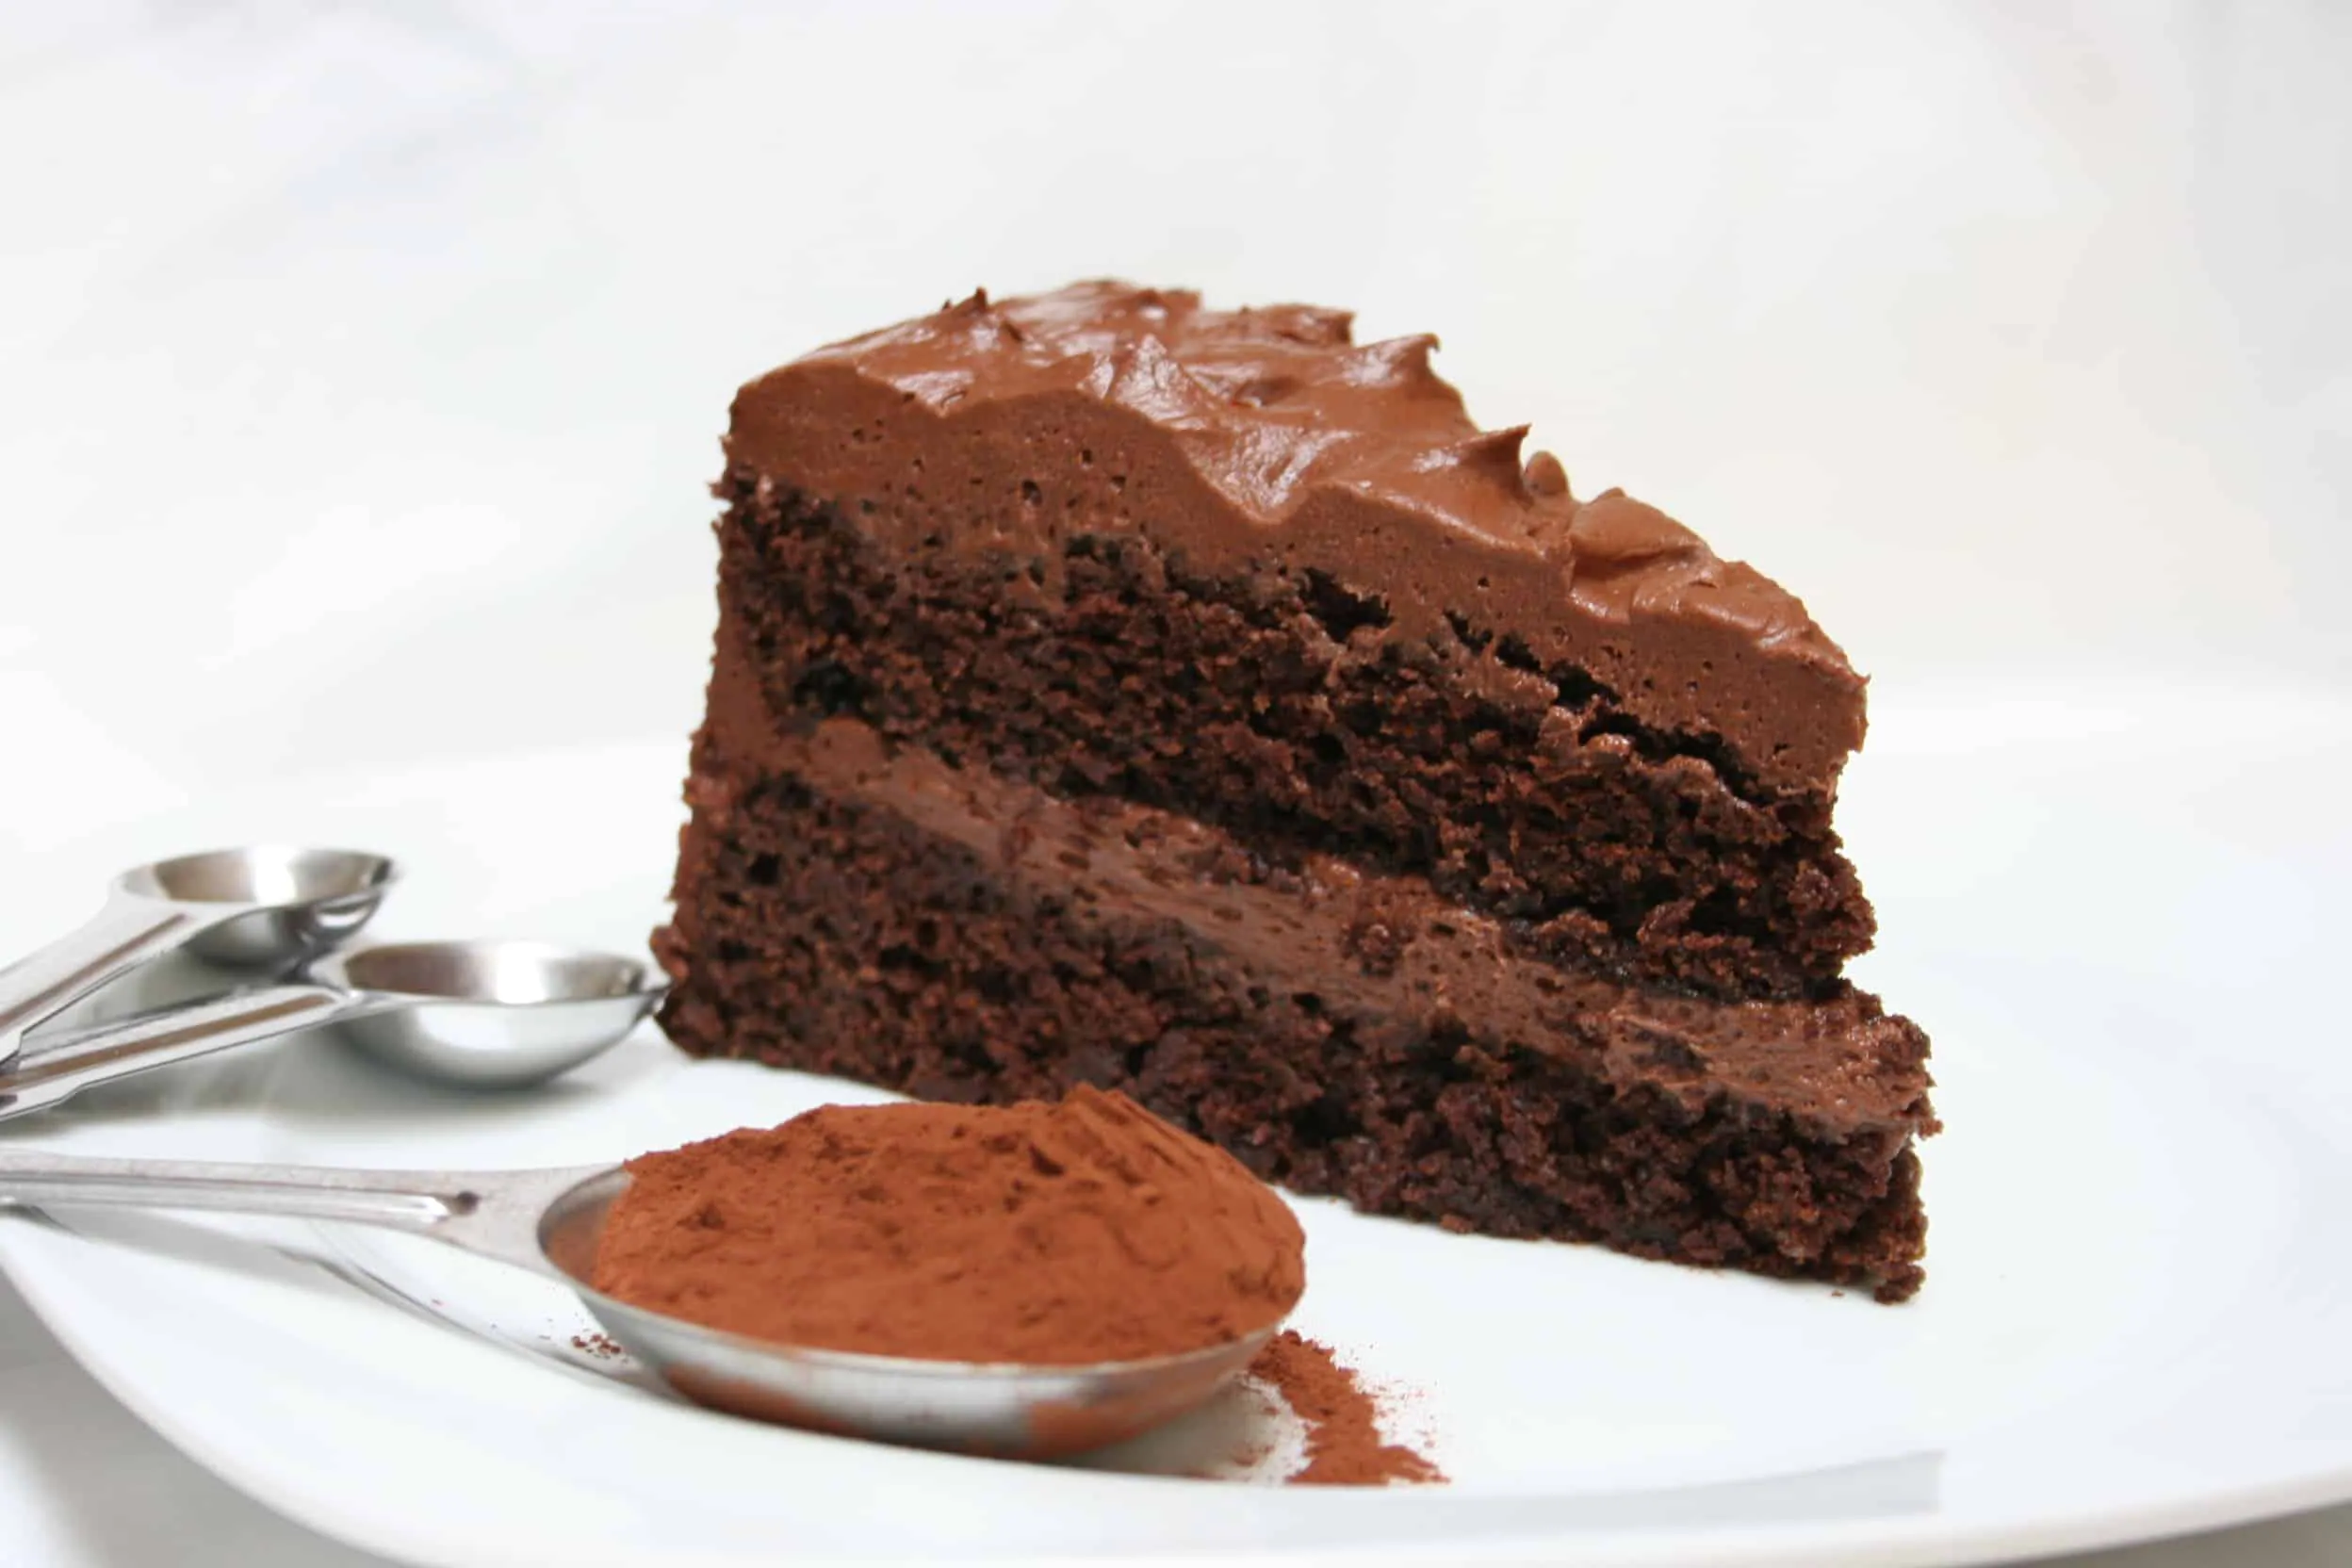 Ghrirardelli Grand Fudge Cake with Chocolate Buttercream Frosting | Savoring Today